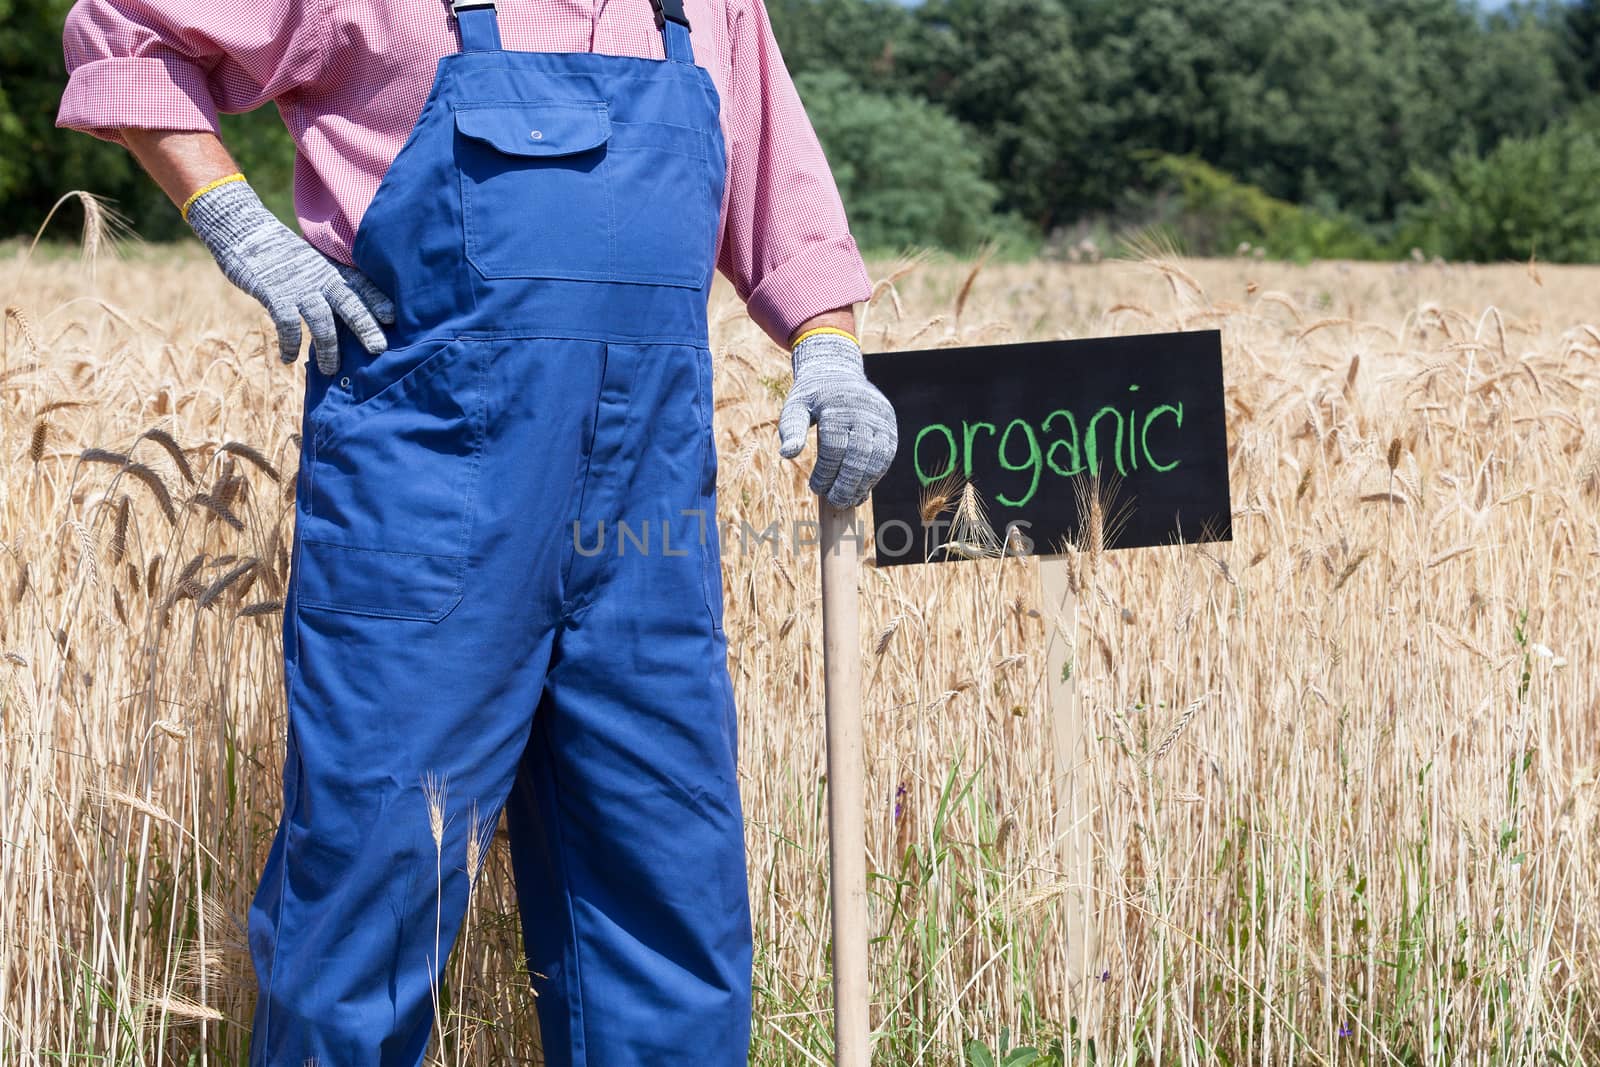 Farmer standing in front of the organic wheat field